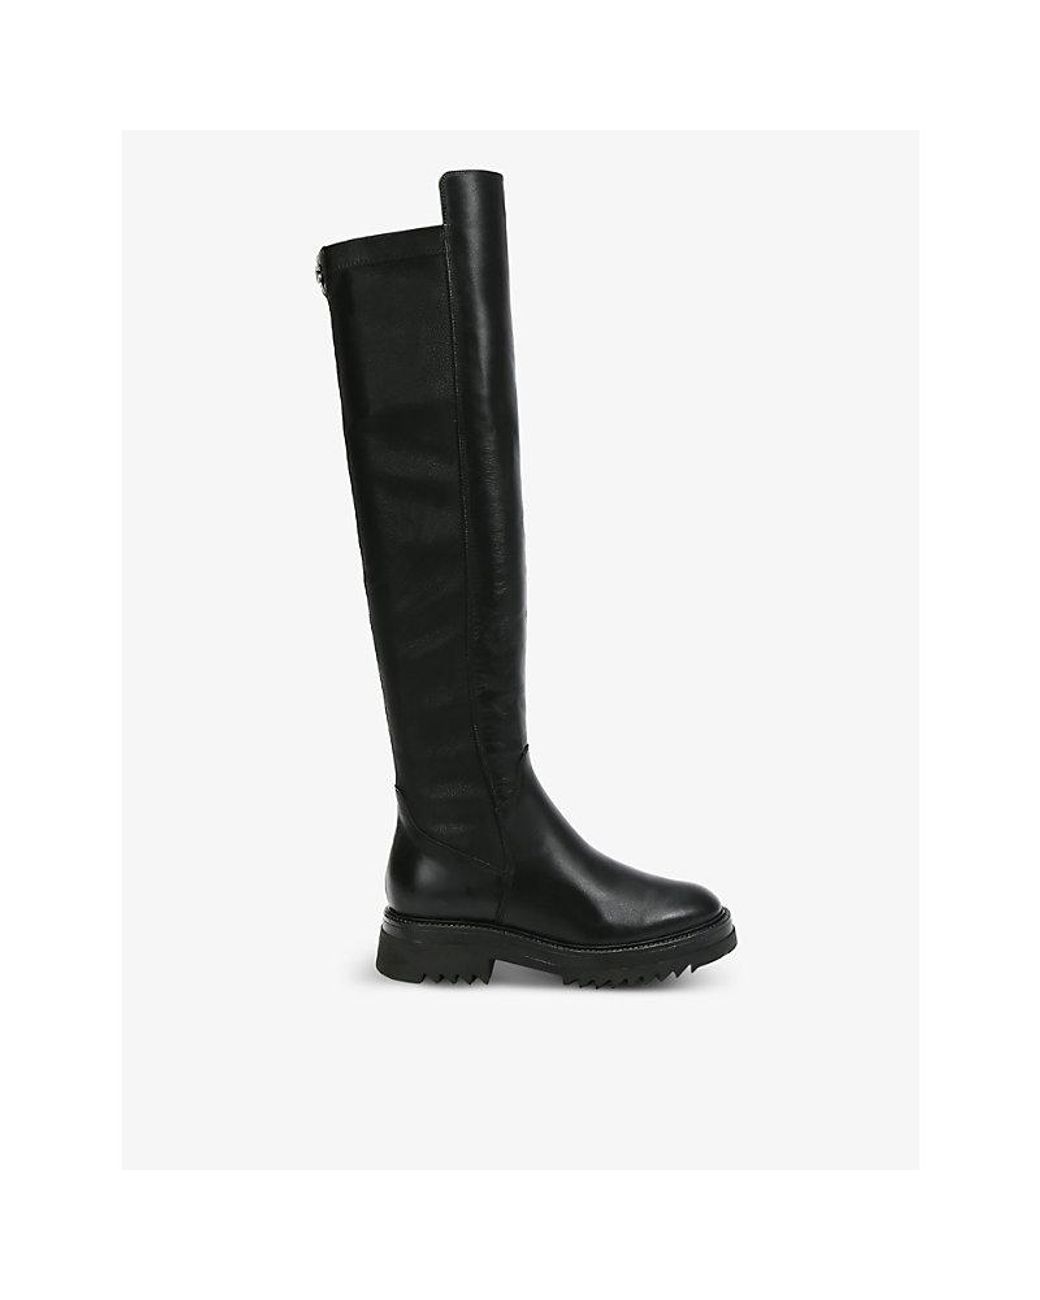 Carvela Kurt Geiger Strong Leather Over-the-knee Heeled Boots in Black |  Lyst